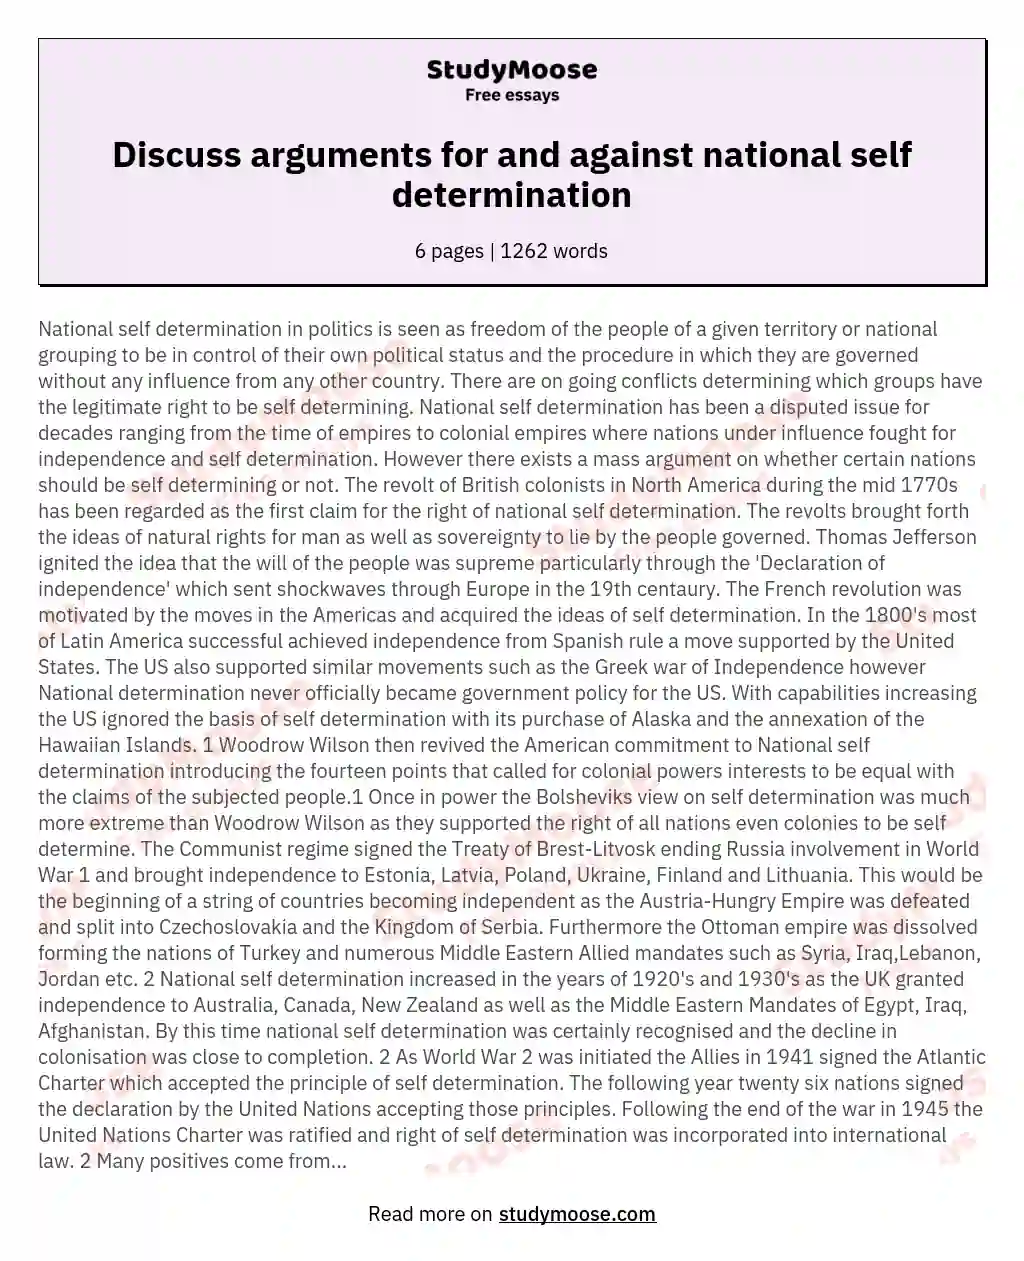 Discuss arguments for and against national self determination